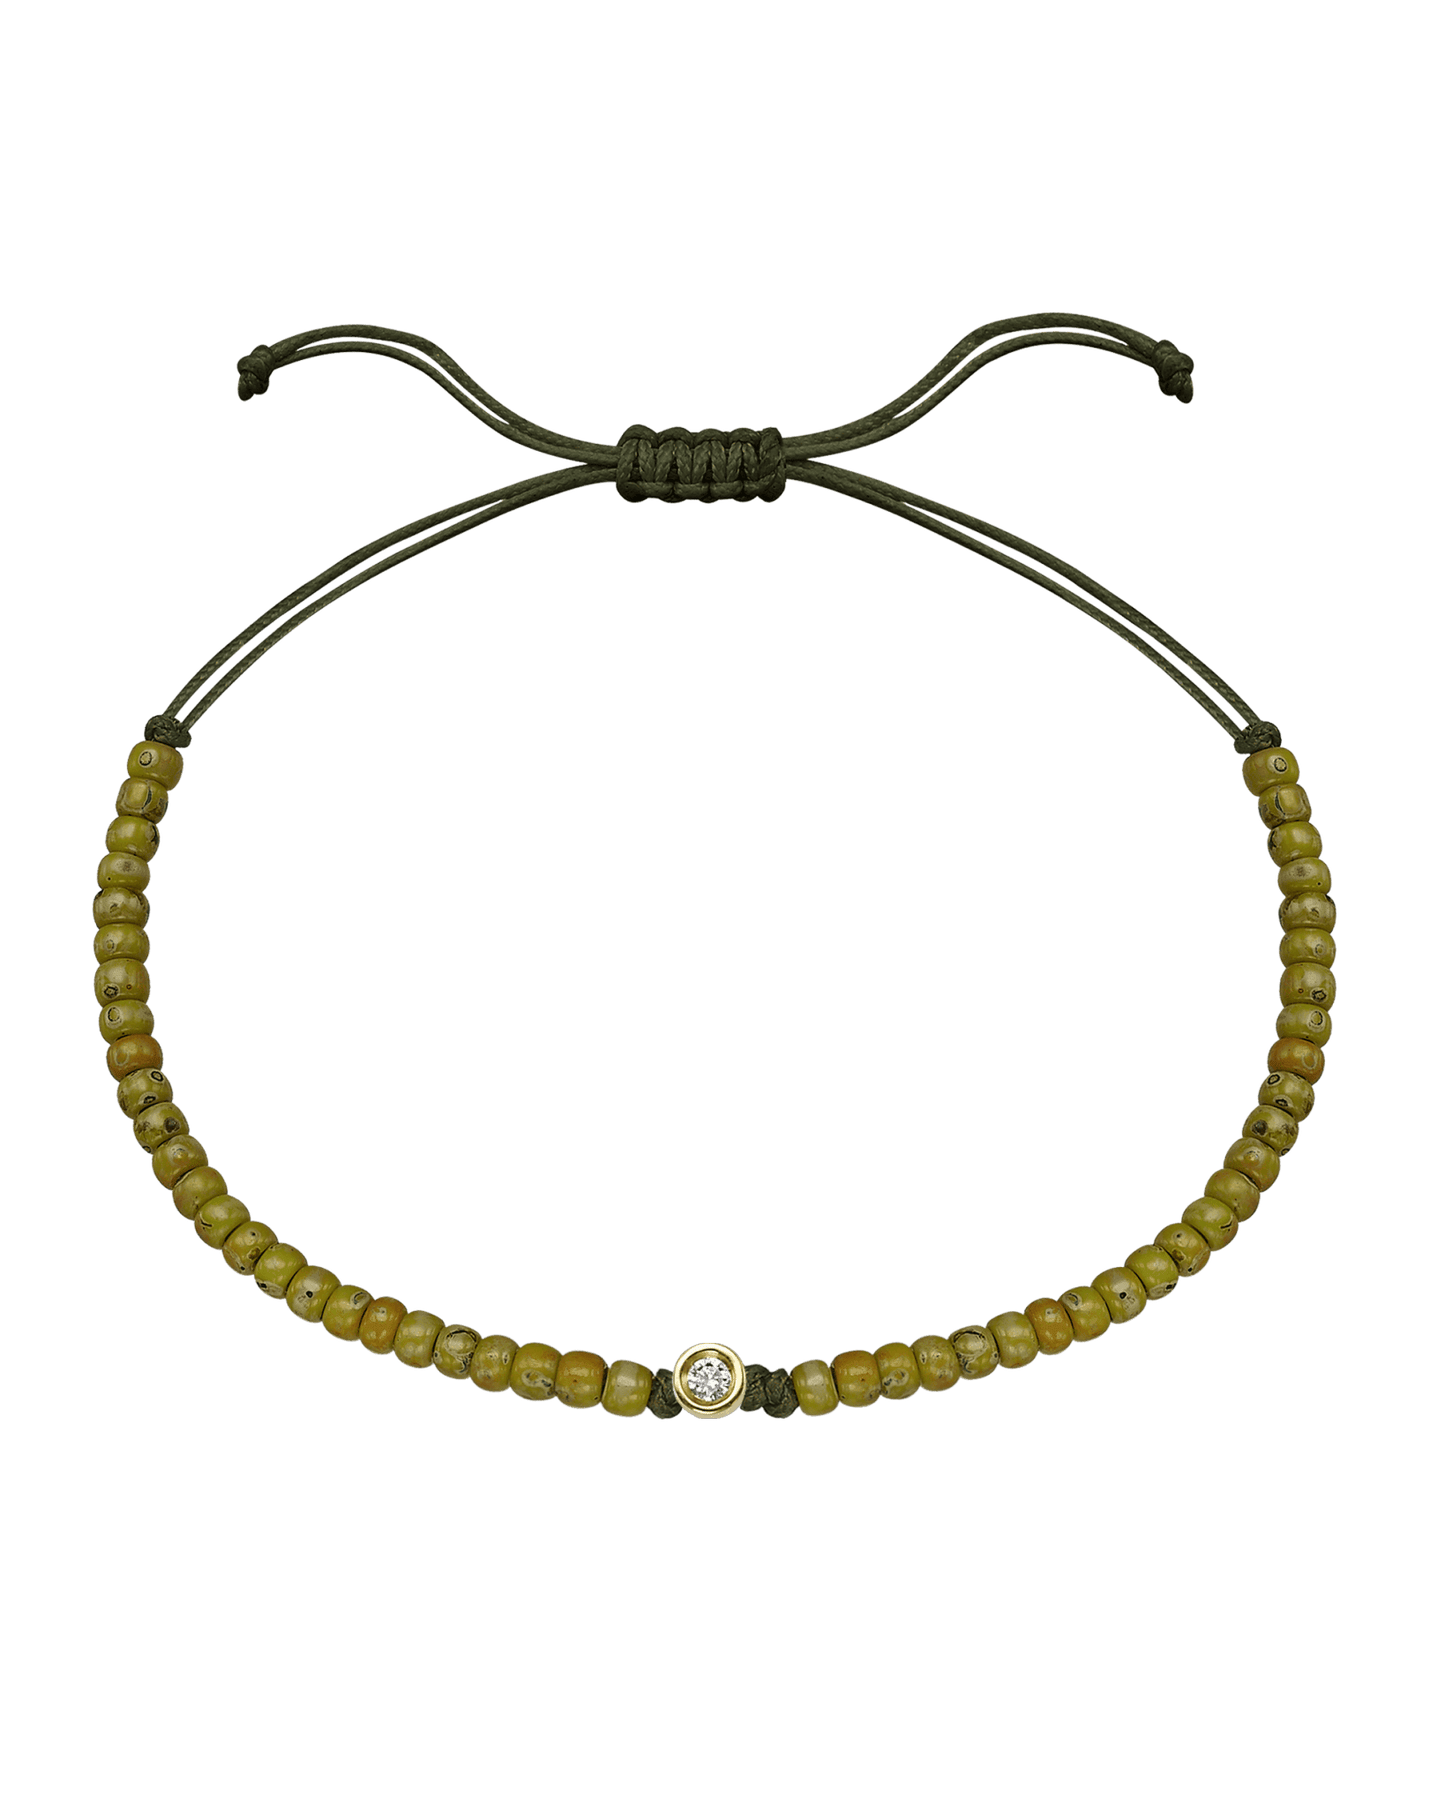 Dyed Green Malachite Beads String of Love - 14K Yellow Gold Bracelets magal-dev Small: 0.03ct 